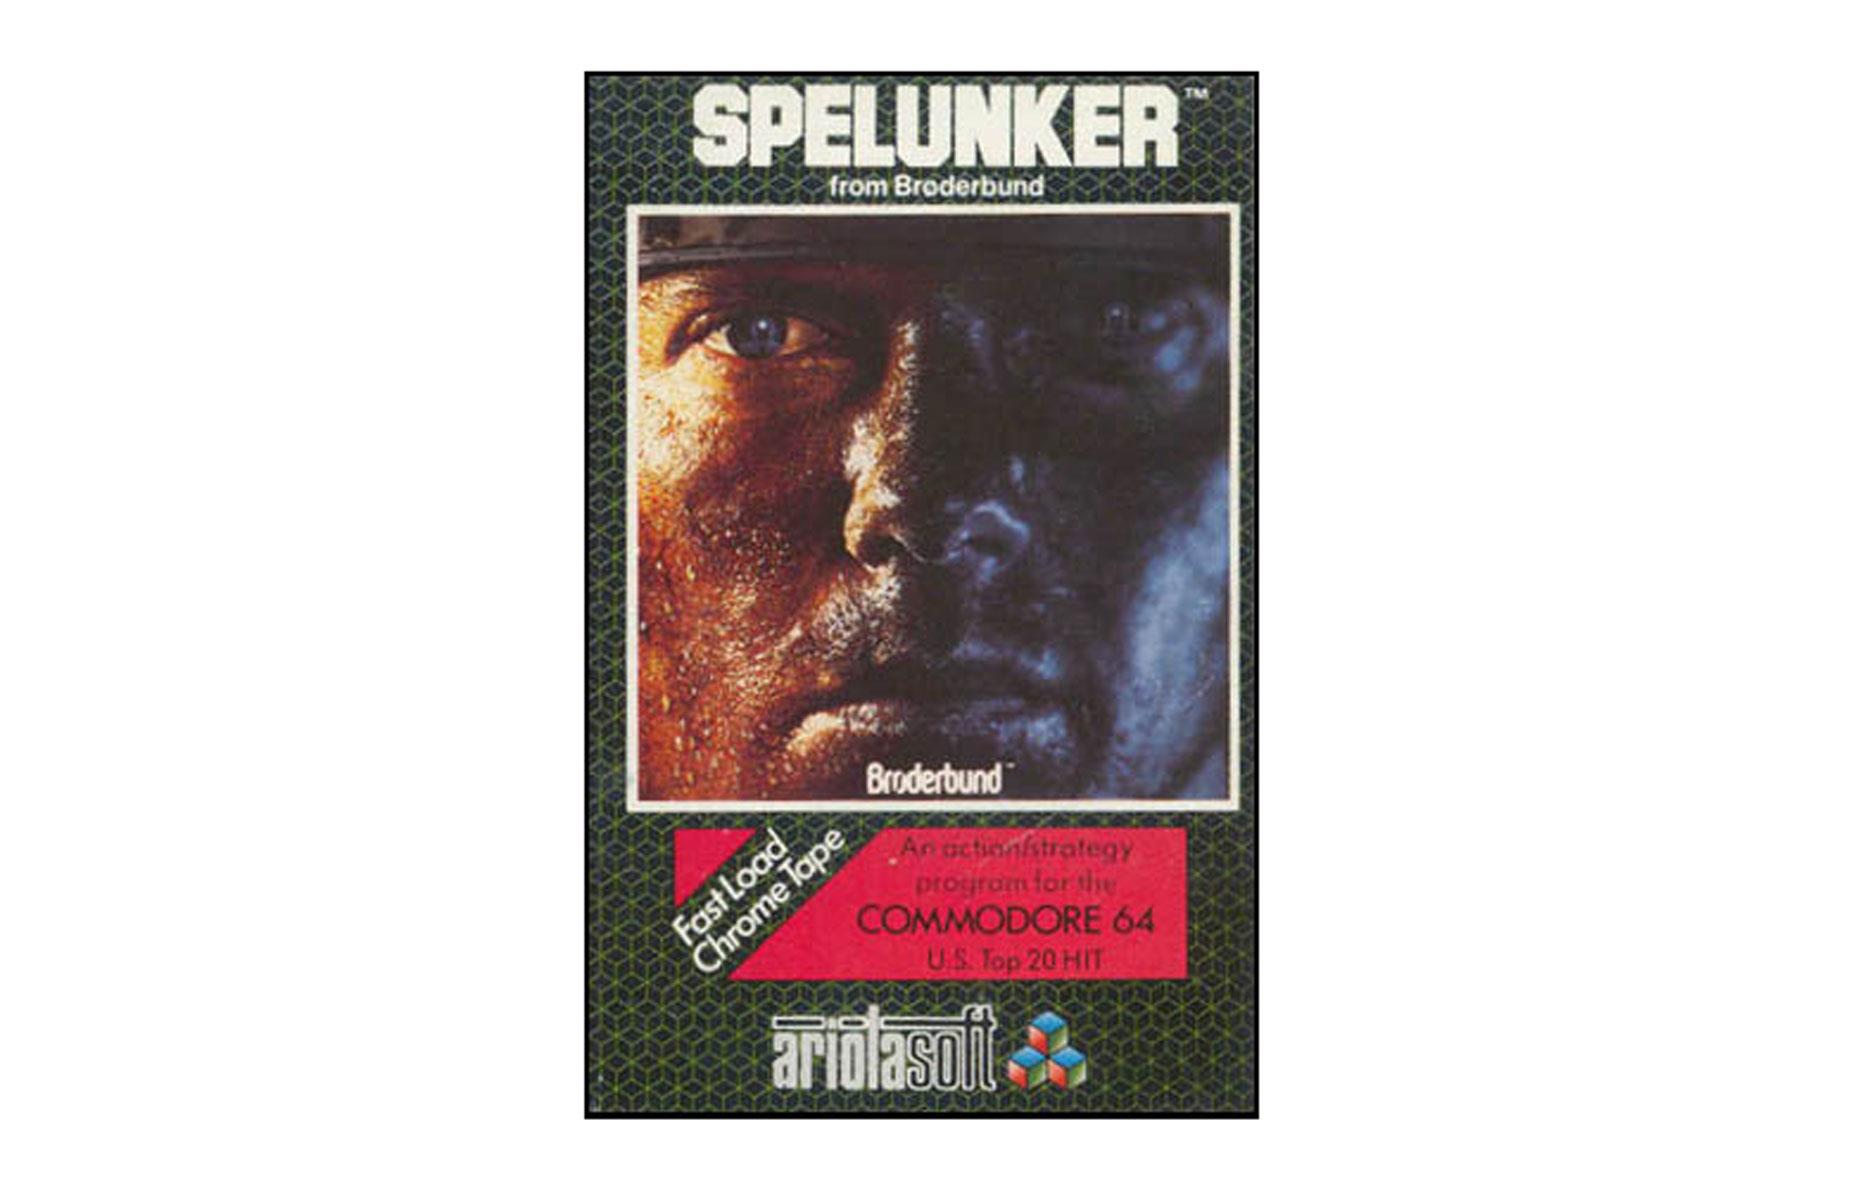 Spelunker (Broderbund) for Commodore 64, 1983: up to $300 (£215)